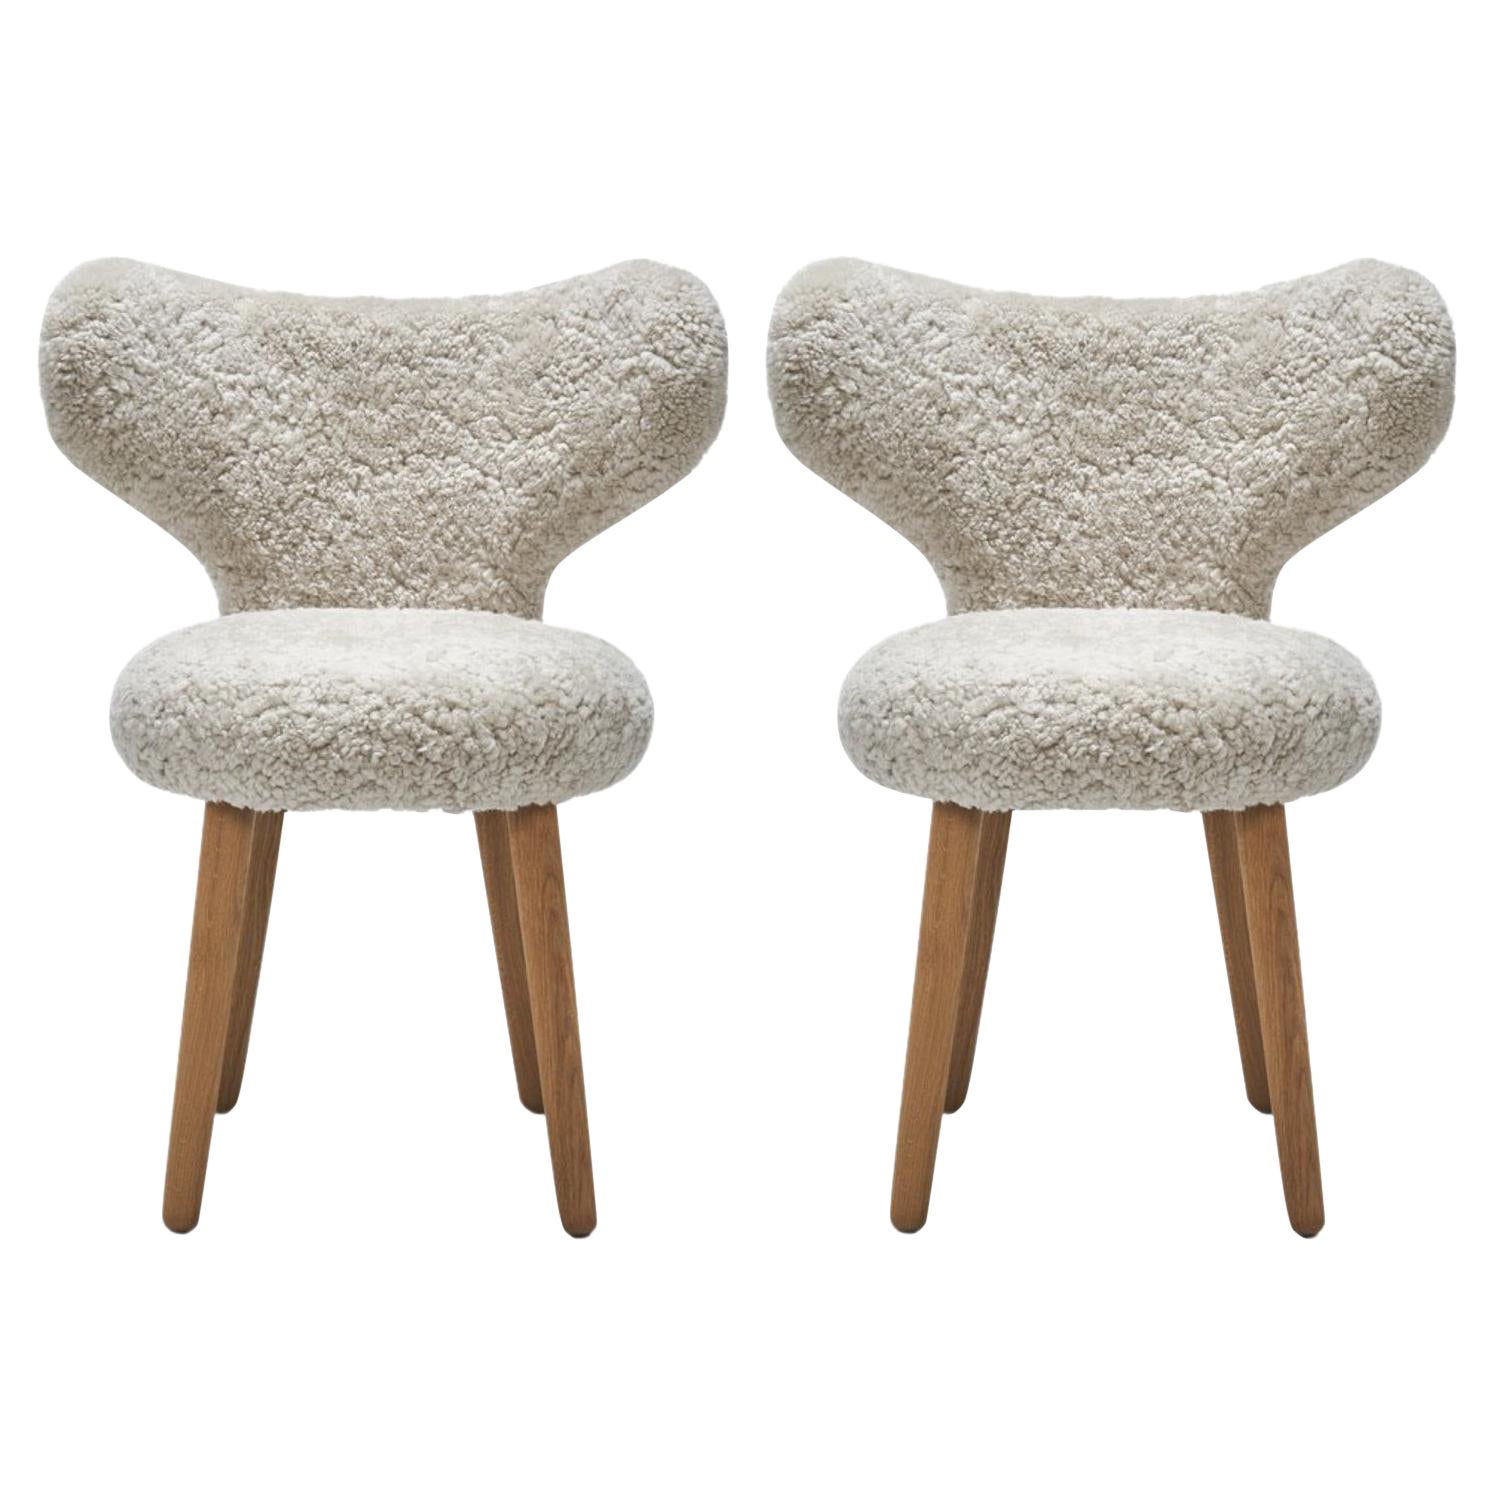 Set of 2 Sheepskin WNG Chairs by Mazo Design For Sale